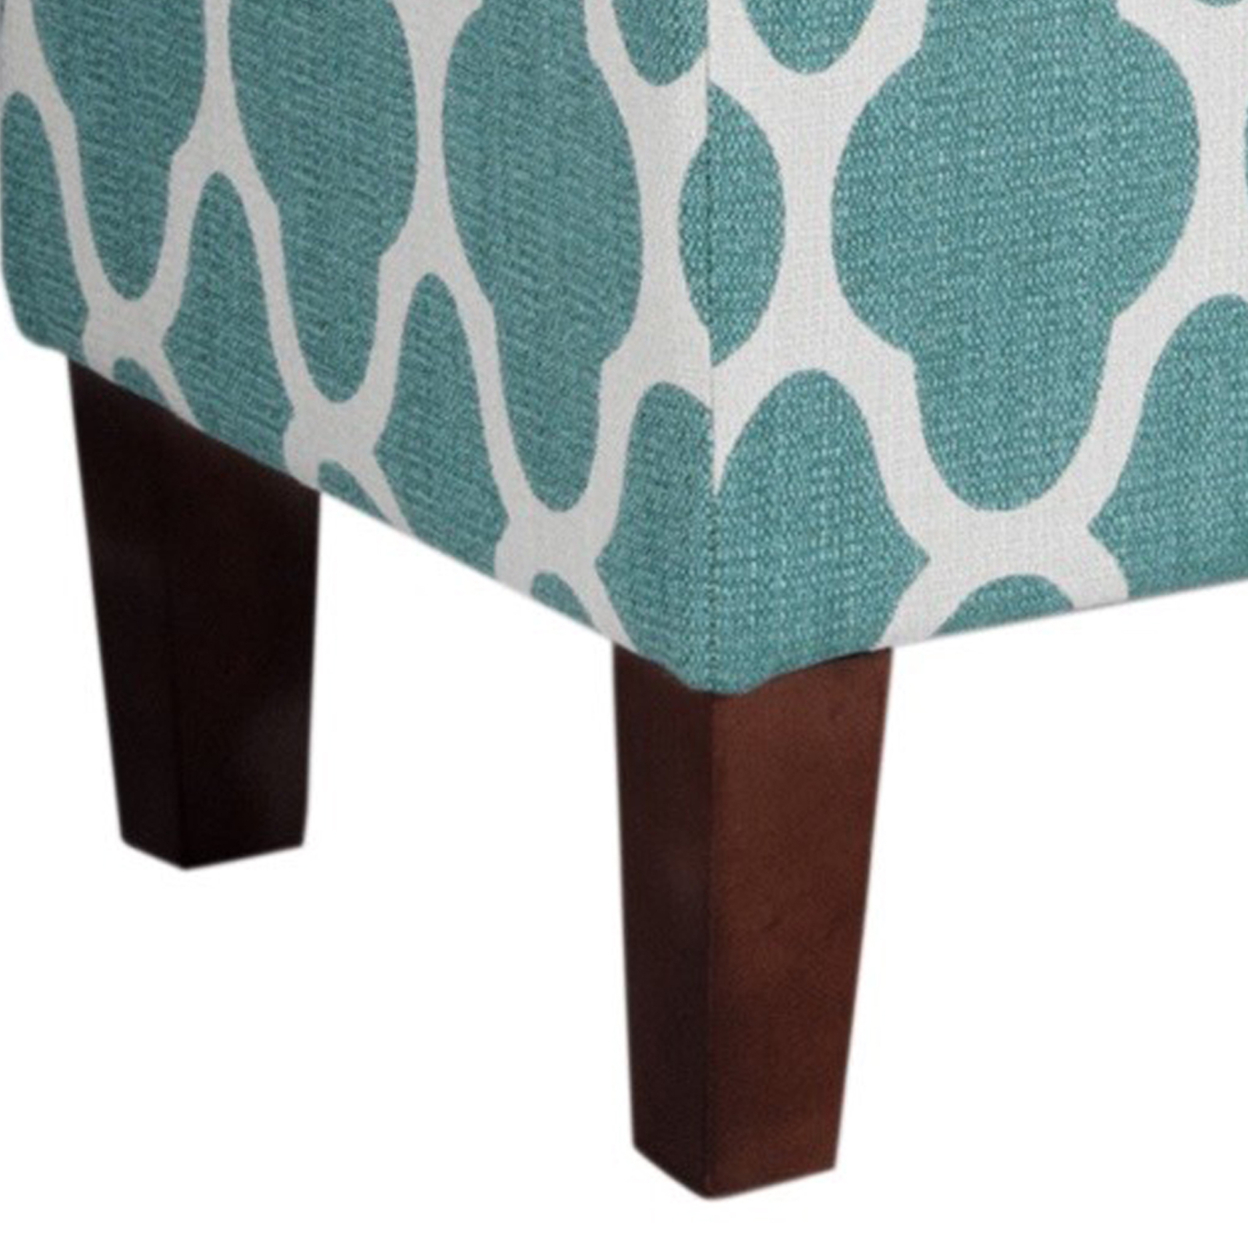 Quatrefoil Print Fabric Upholstered Wooden Bench With Hinged Storage, Large, Teal Blue And Cream- Saltoro Sherpi